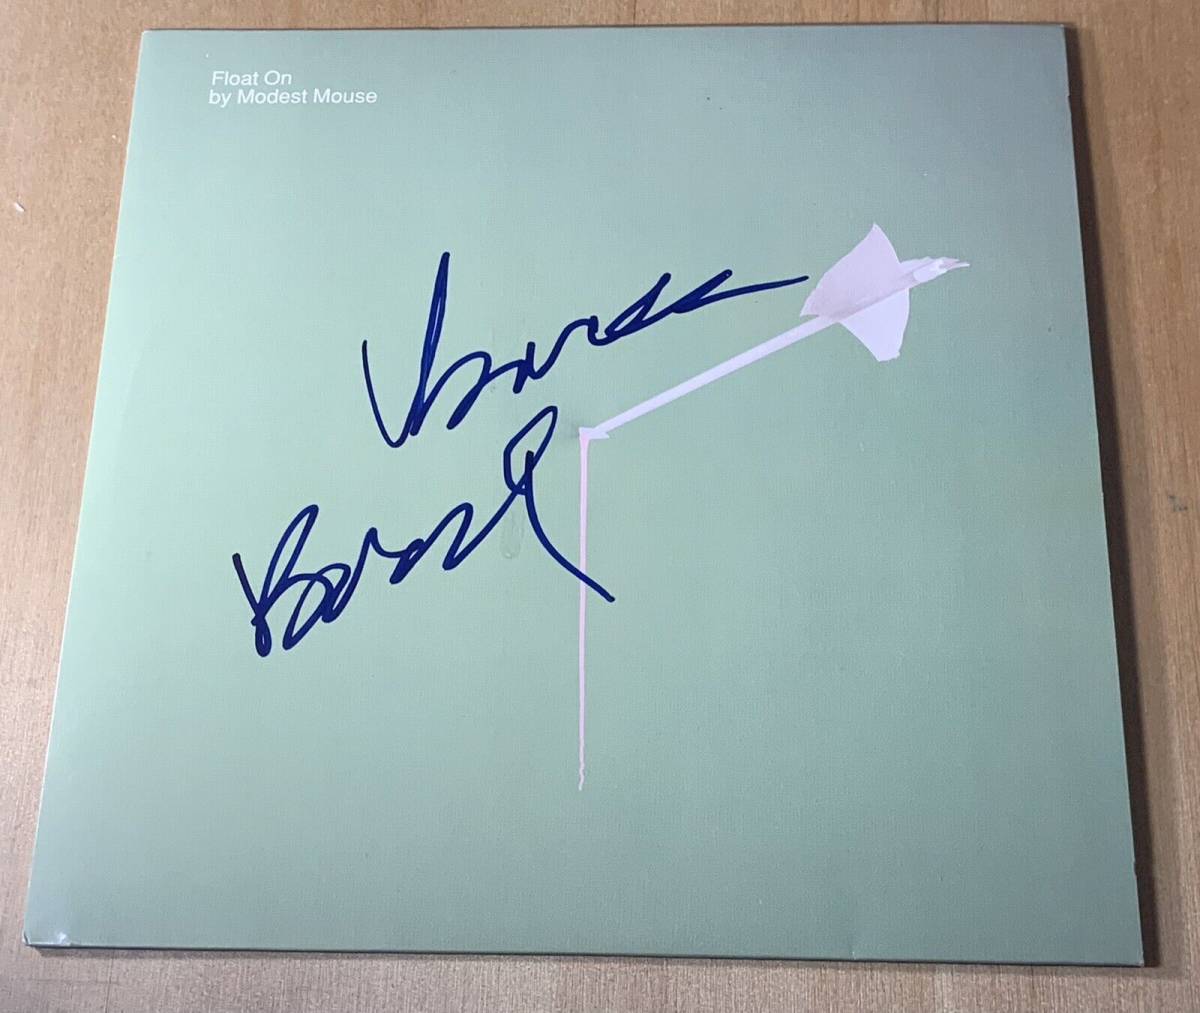 Modest Mouse signed 7インチ inch vinyl record Float On Isaac Bロック proof 海外 即決